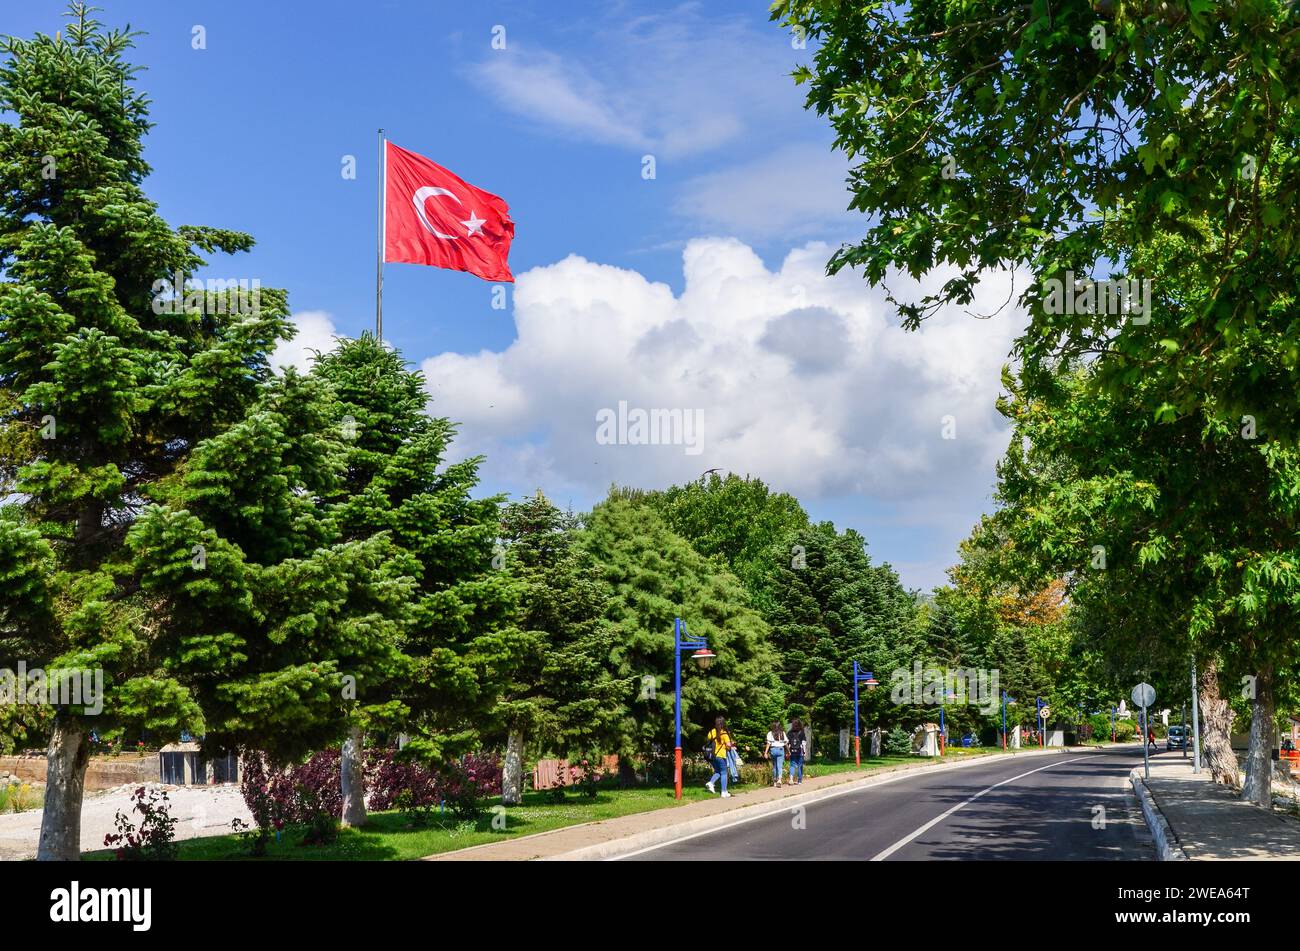 A Turkish flag waving over a clear road lined with lush green trees under a blue sky with clouds Stock Photo